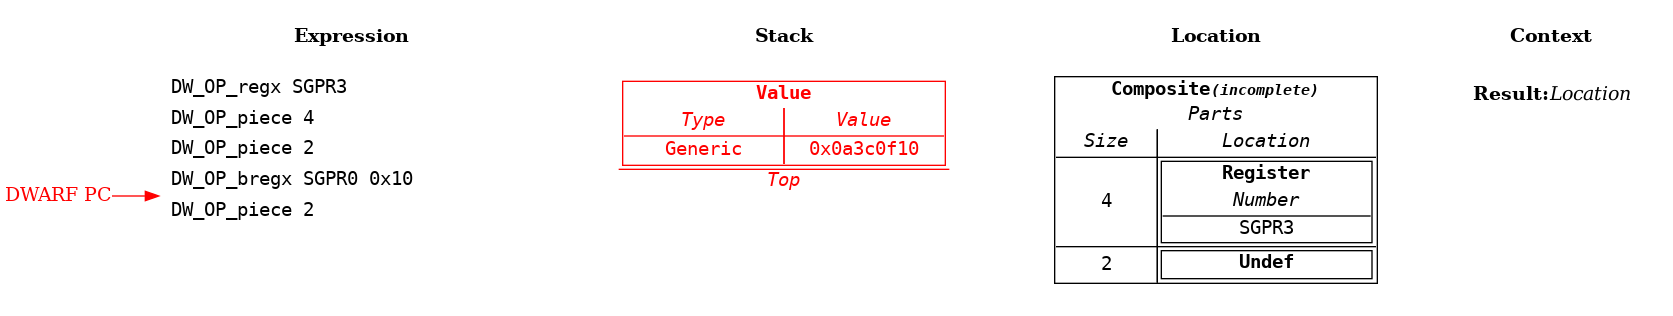 Variable Spread Across Different Locations Example: Step 5